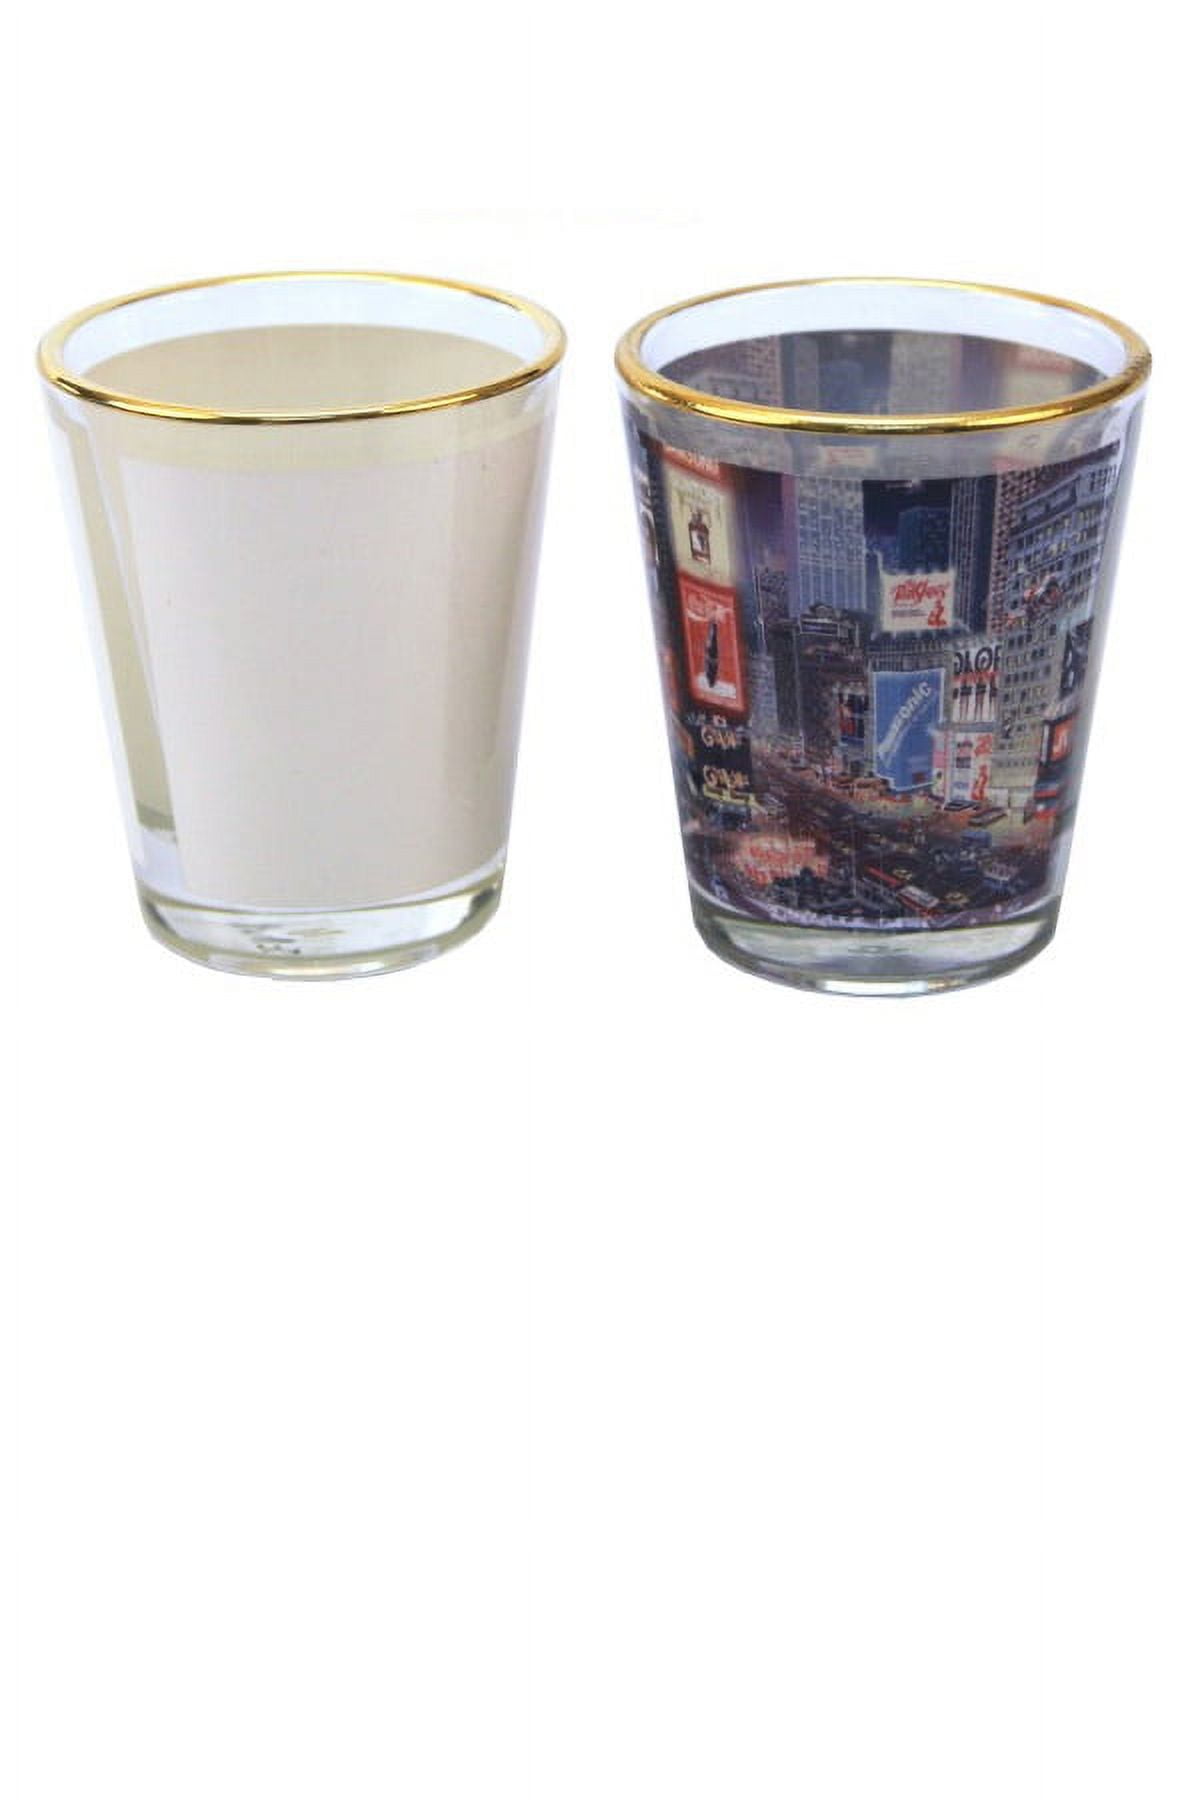 12 Blank Sublimation Coated Ceramic White Shot Glasses Tequila 1.5 ounces  Heat Thermal Transfer Dye